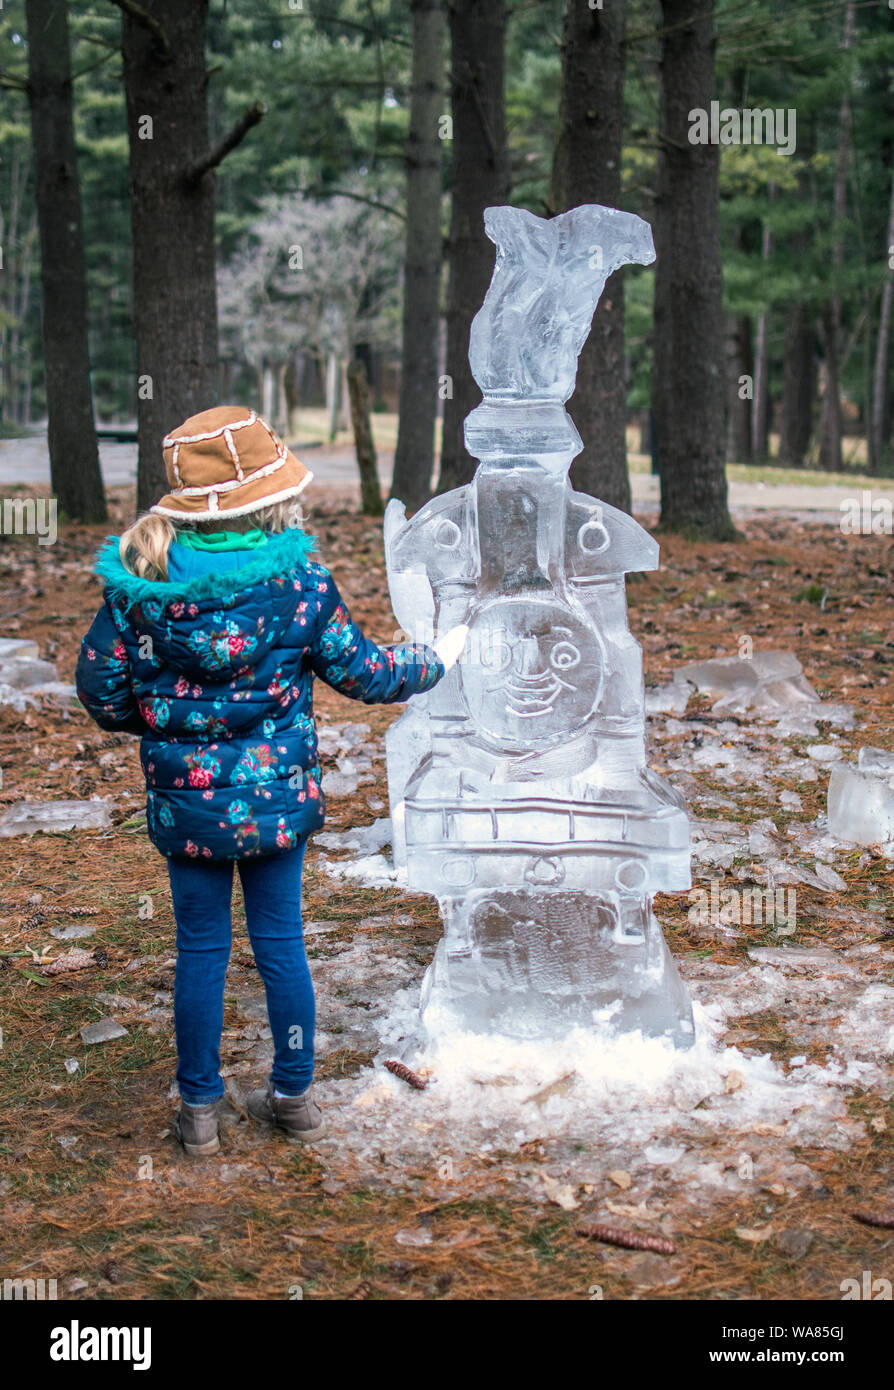 March 17, 2019 Bendix woods Indiana USA; a title girl examines an ice carving of Thomas the tank train engine, at the sugar camp days event in Indiana Stock Photo